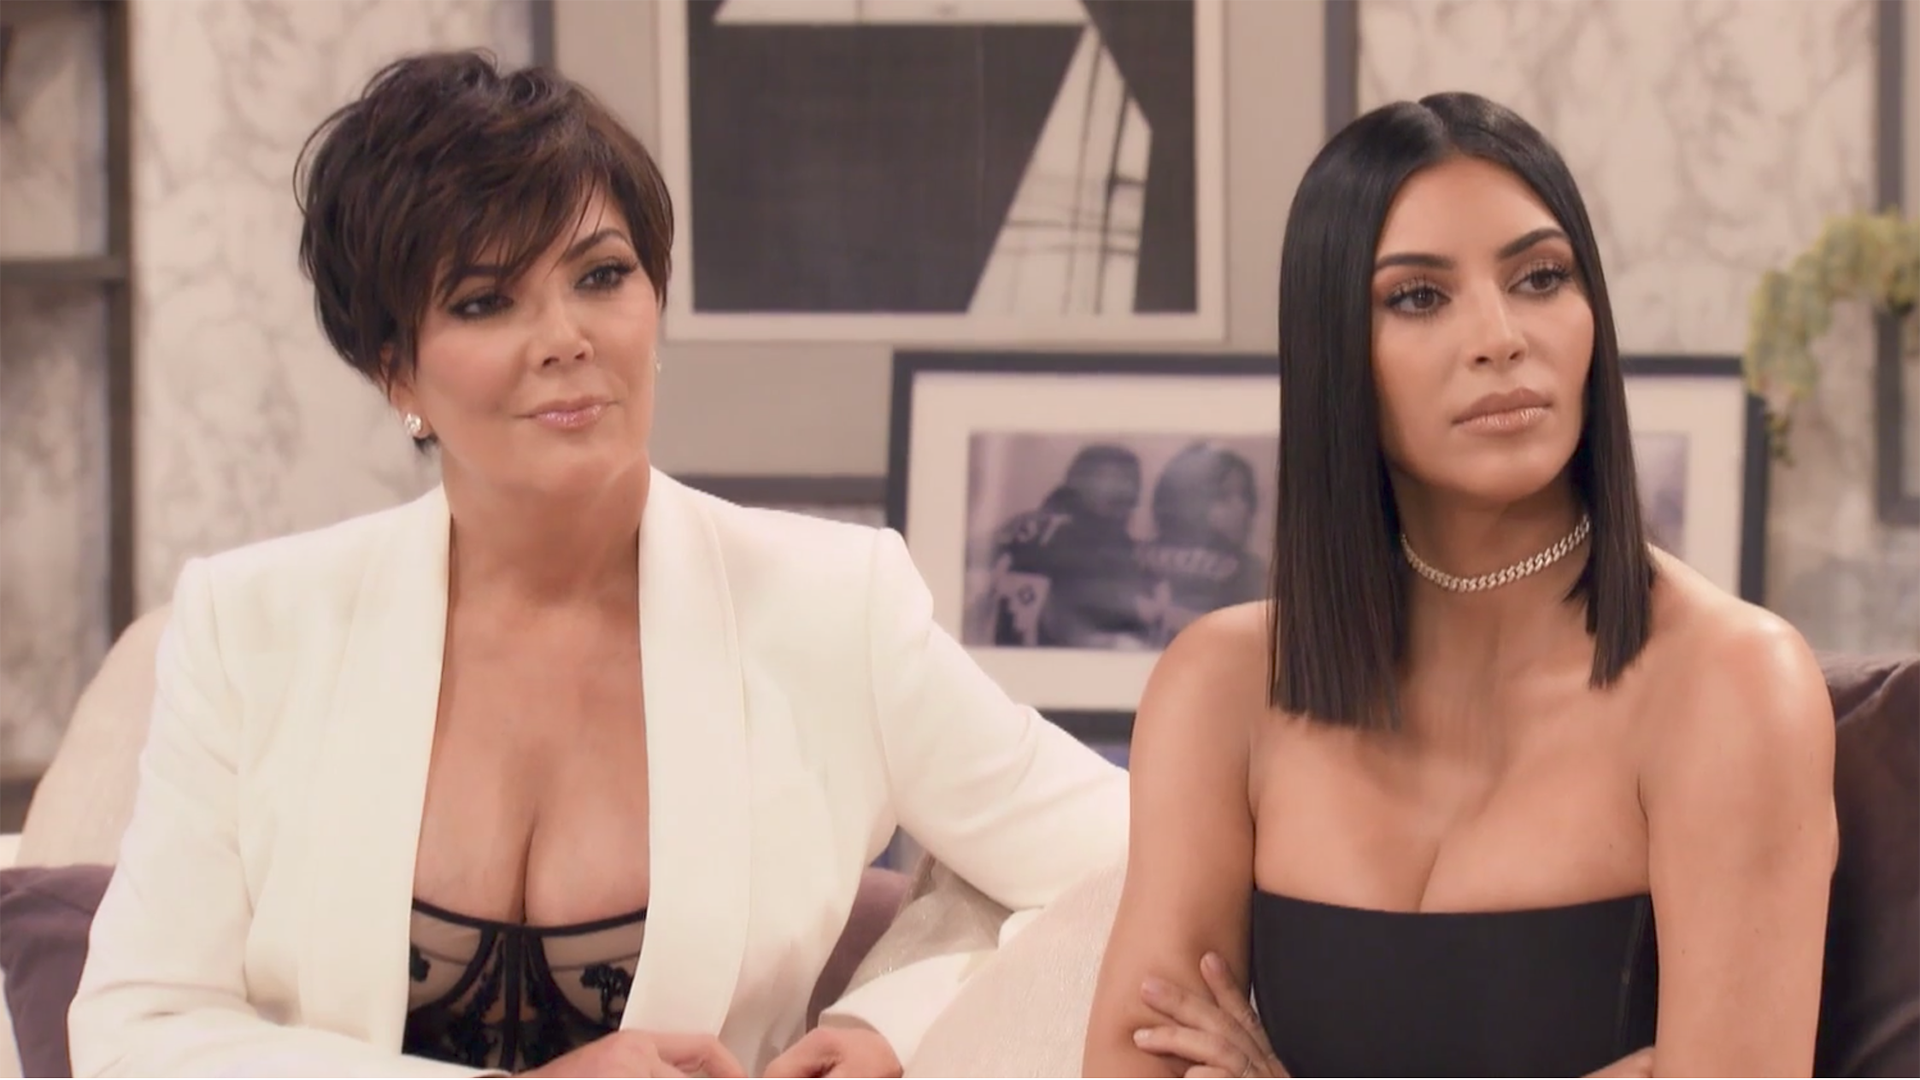 The Kardashians Reveal Their Toughest Scenes From Keeping Up With the  Kardashians - Kris Jenner on Most Difficult Day to Film